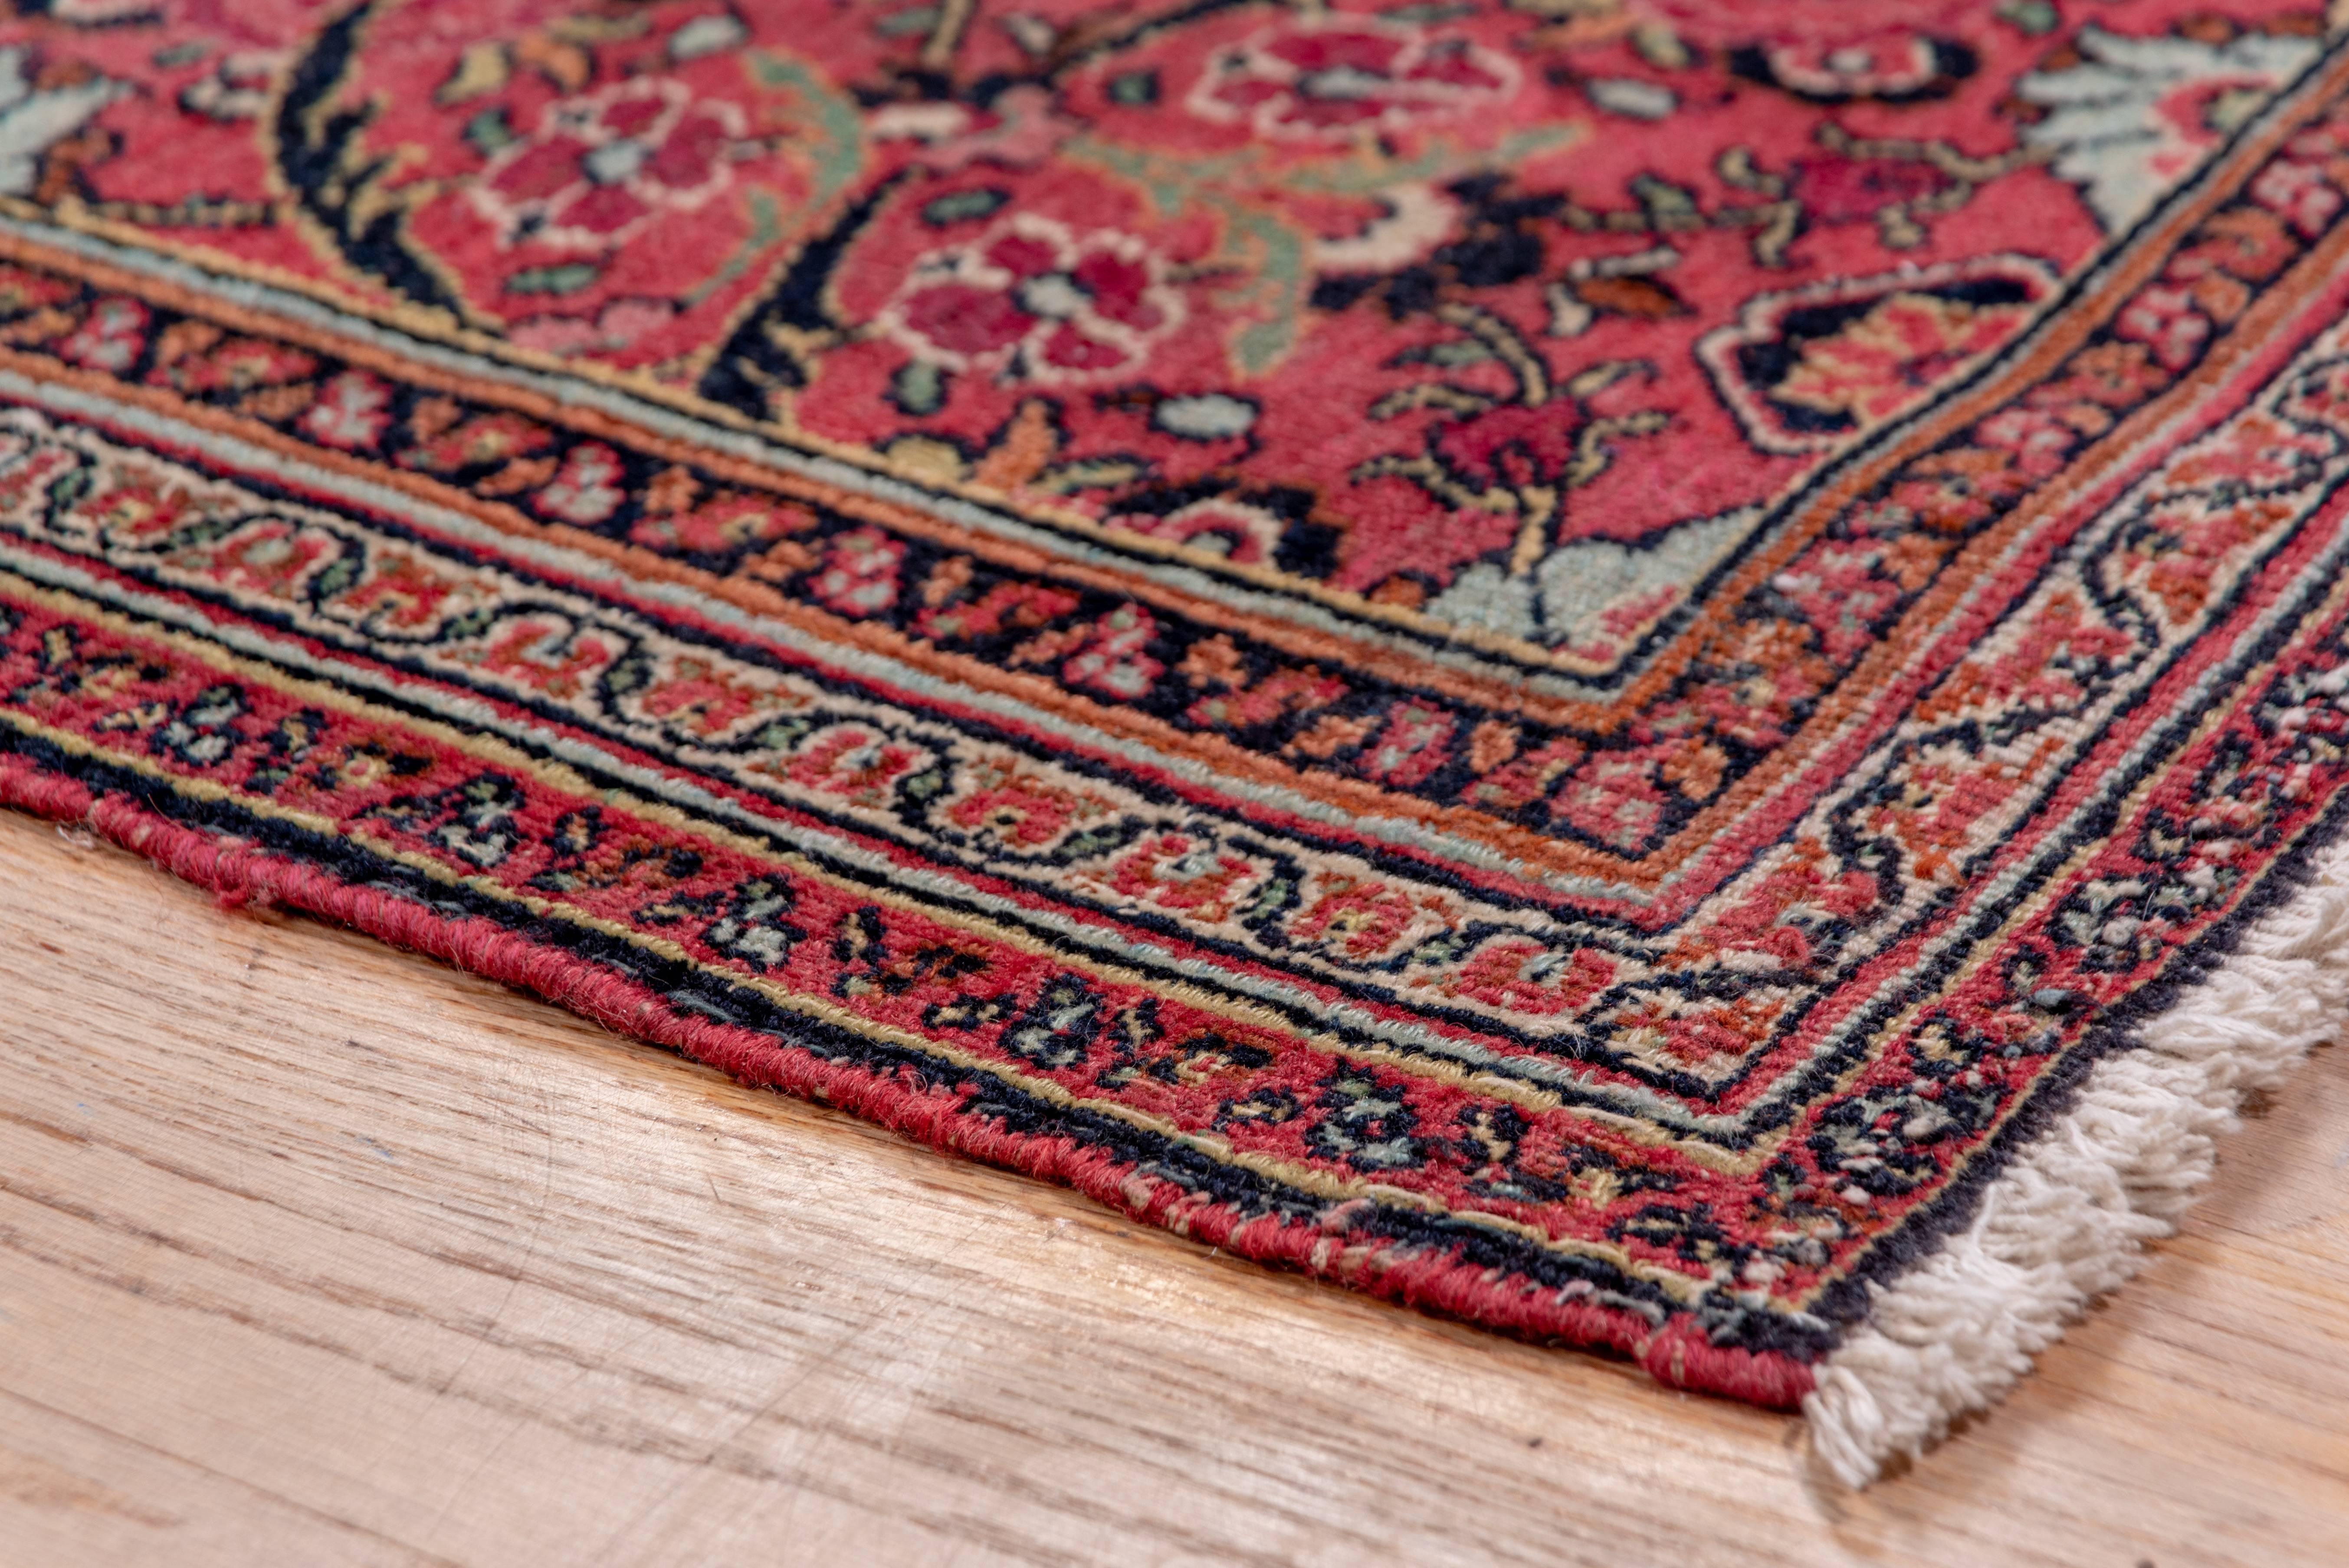 Persian Antique Khorassan Carpet, Red Field For Sale 4